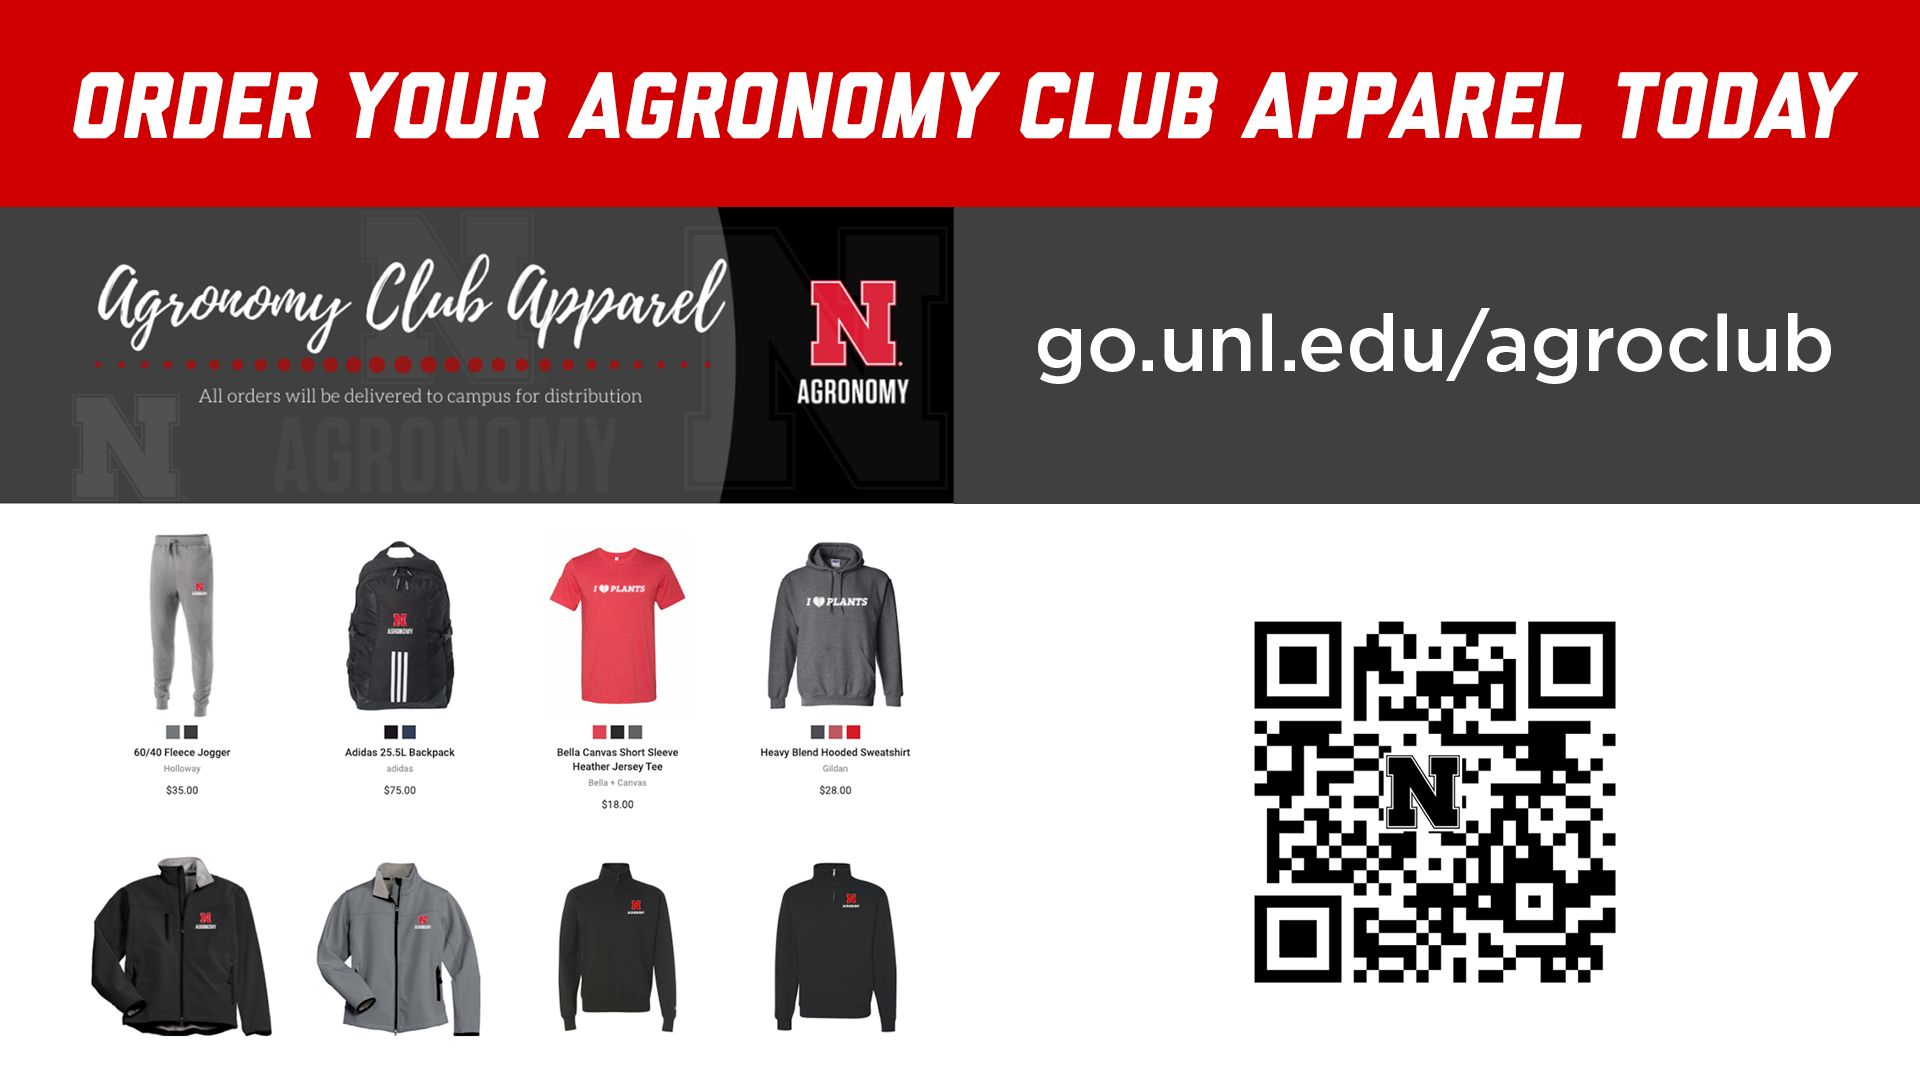 The Agronomy Club apparel sale is going on now until Feb. 21.